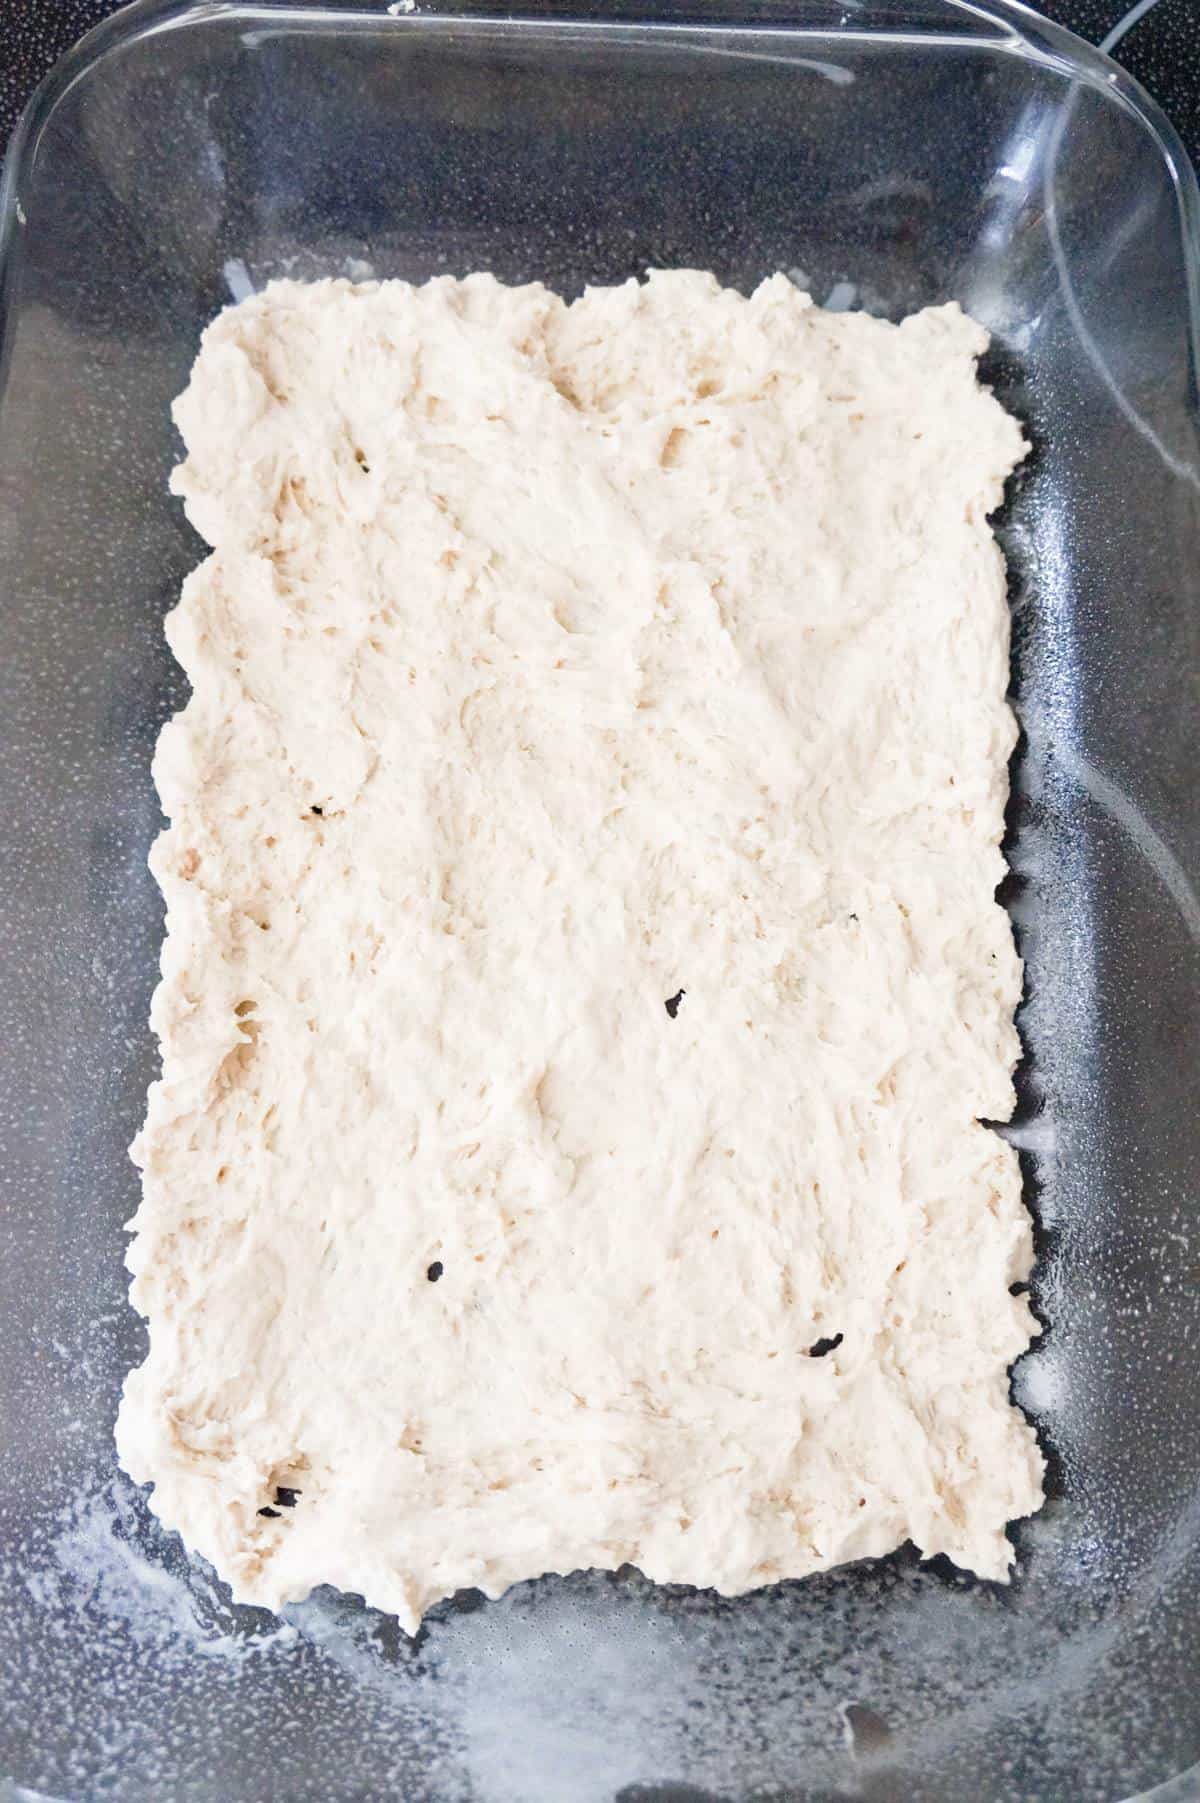 biscuit dough in the bottom of a glass baking dish